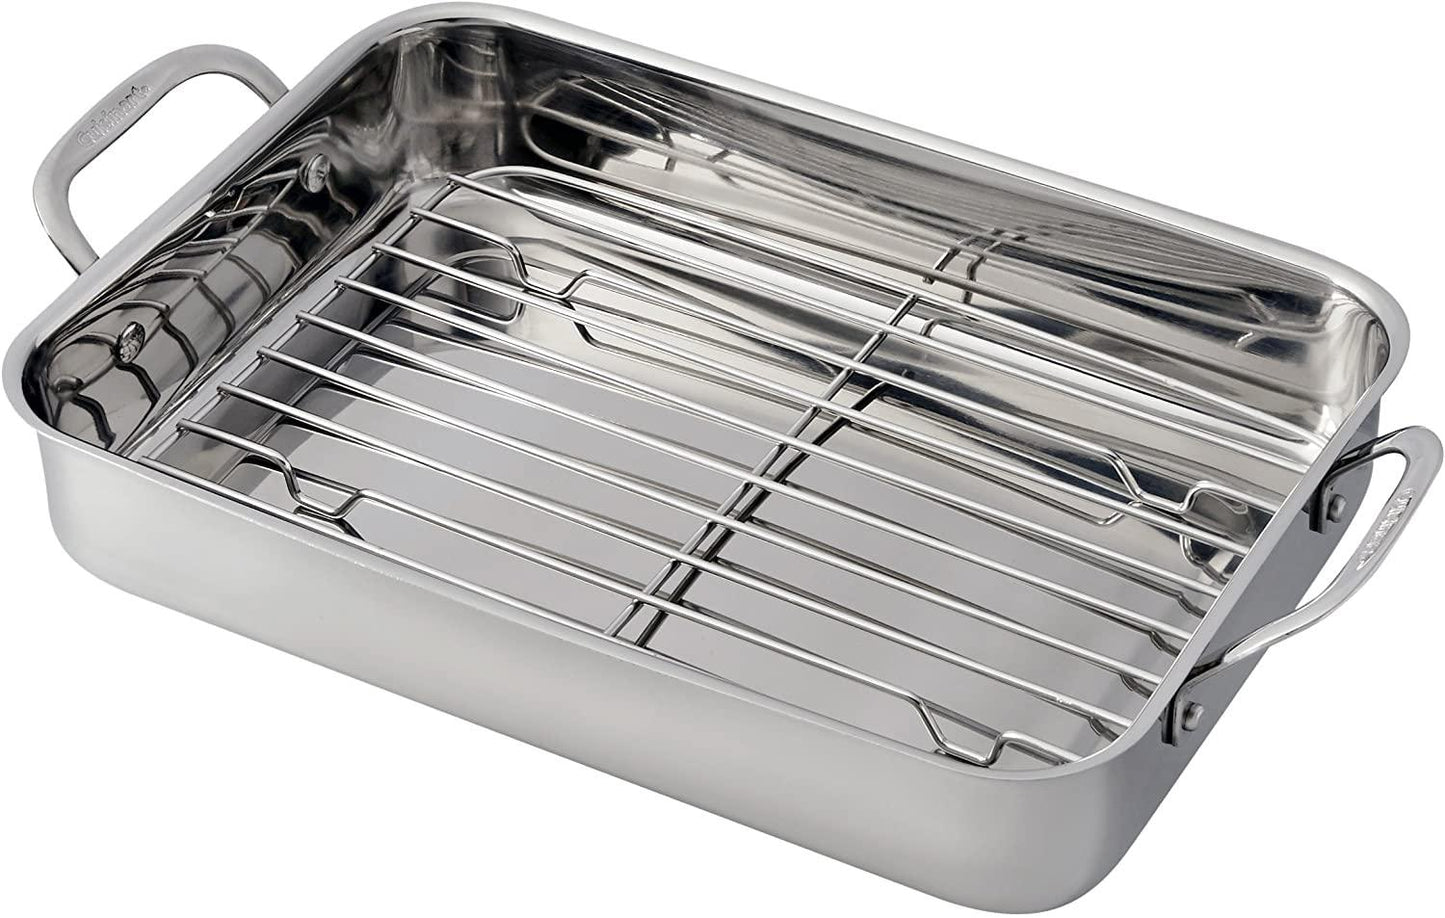 Cuisinart 7117-14RR 14-Inch Chef's-Classic Cookware-Collection, Lasagna Pan w/Stainless Roasting Rack, Stainless Steel - CookCave